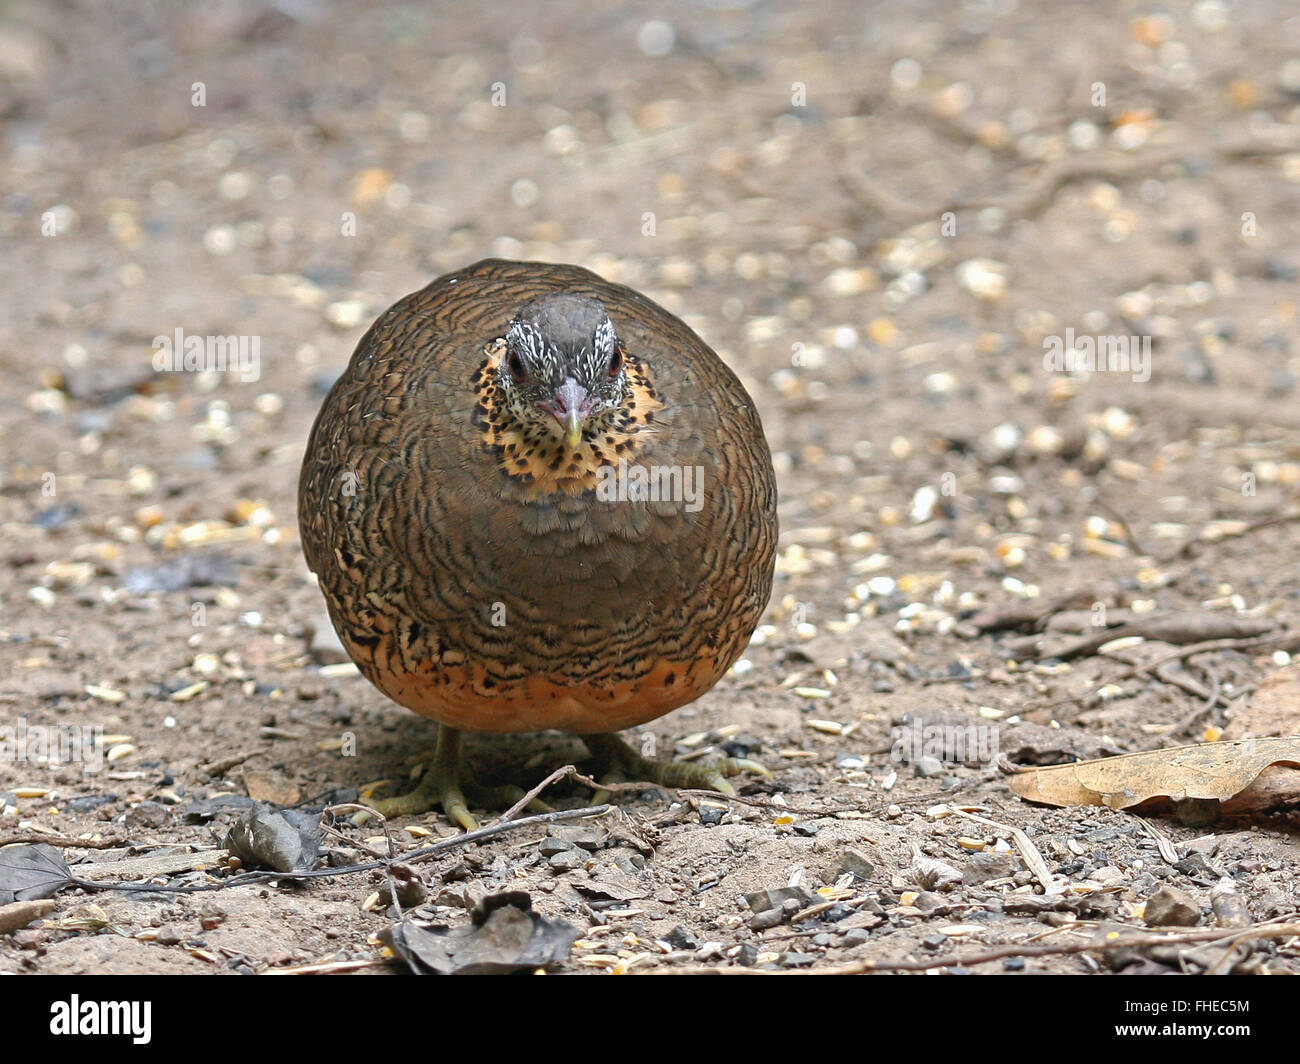 A Scaly-breasted Partridge (Arborophila chloropus) on the forest floor in Western Thailand Stock Photo